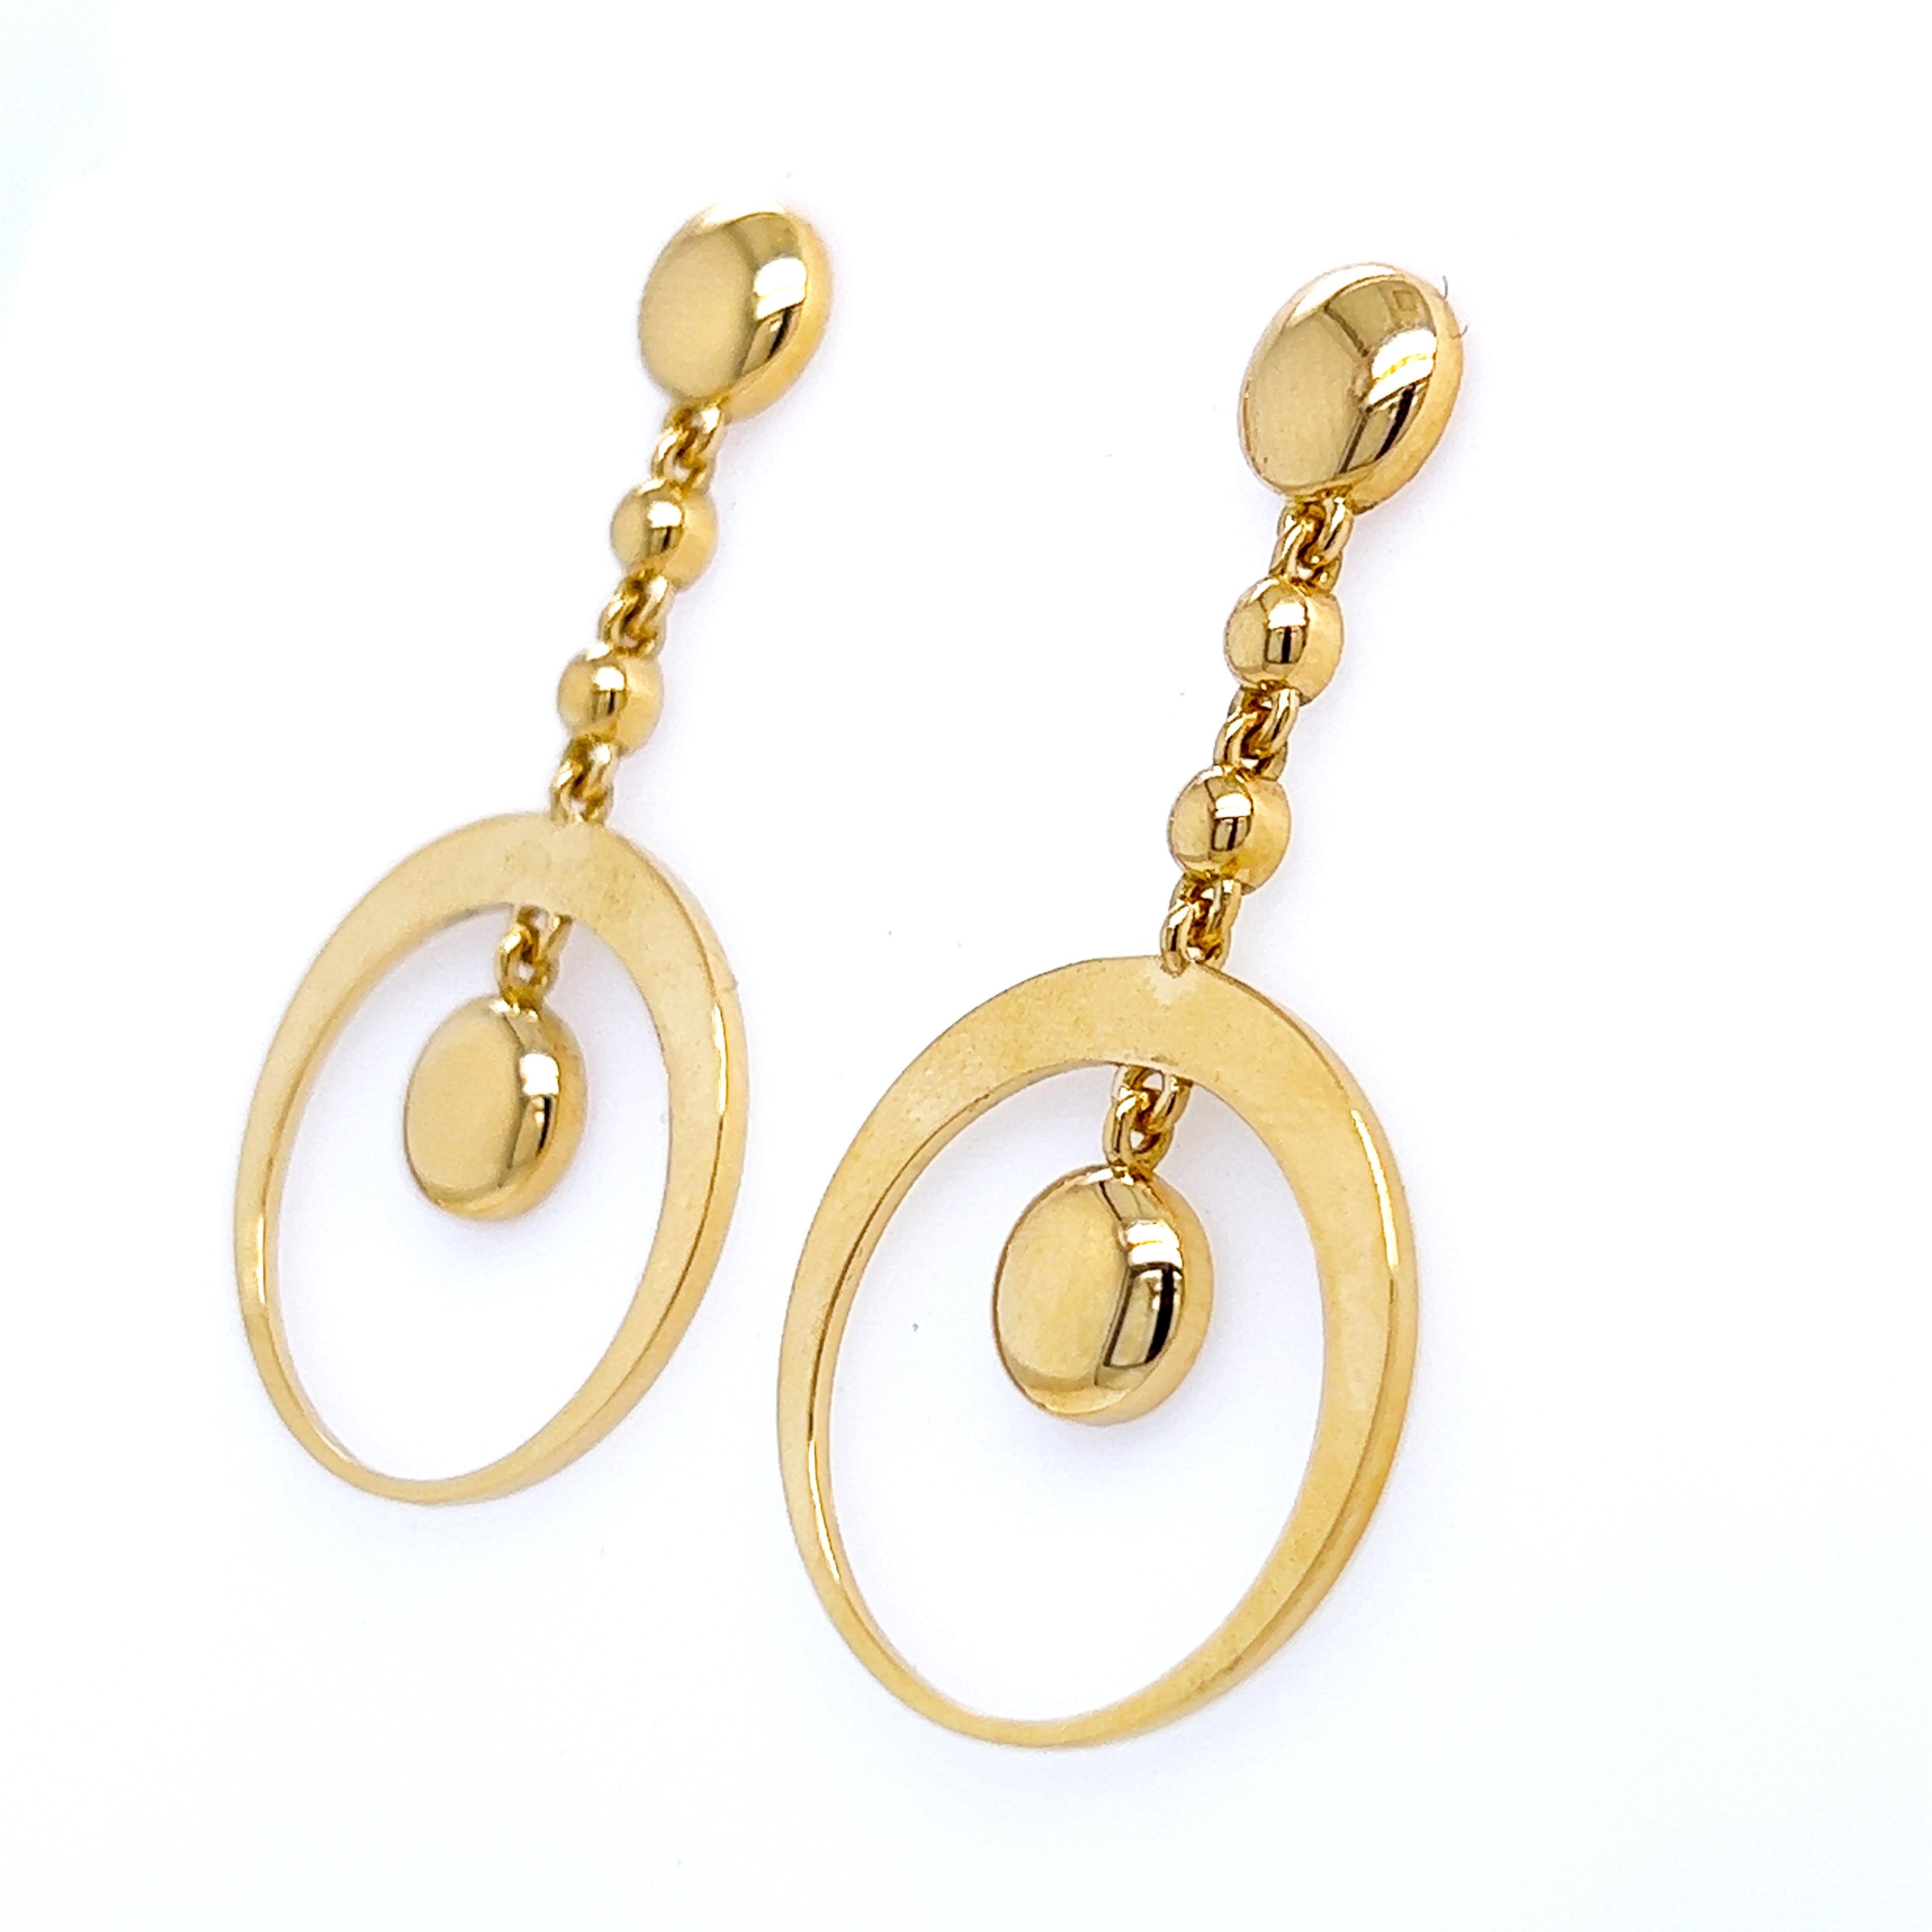 Chic yet timeless, absolutely wearable, yet unique, 18K Yellow Gold hand crafted Setting Earrings.
In our smart tobacco suede leather box and pouch.
Our pieces are all accompanied by a detailed certificate.
Lenght 1.614inches, 41mm, circle diameter